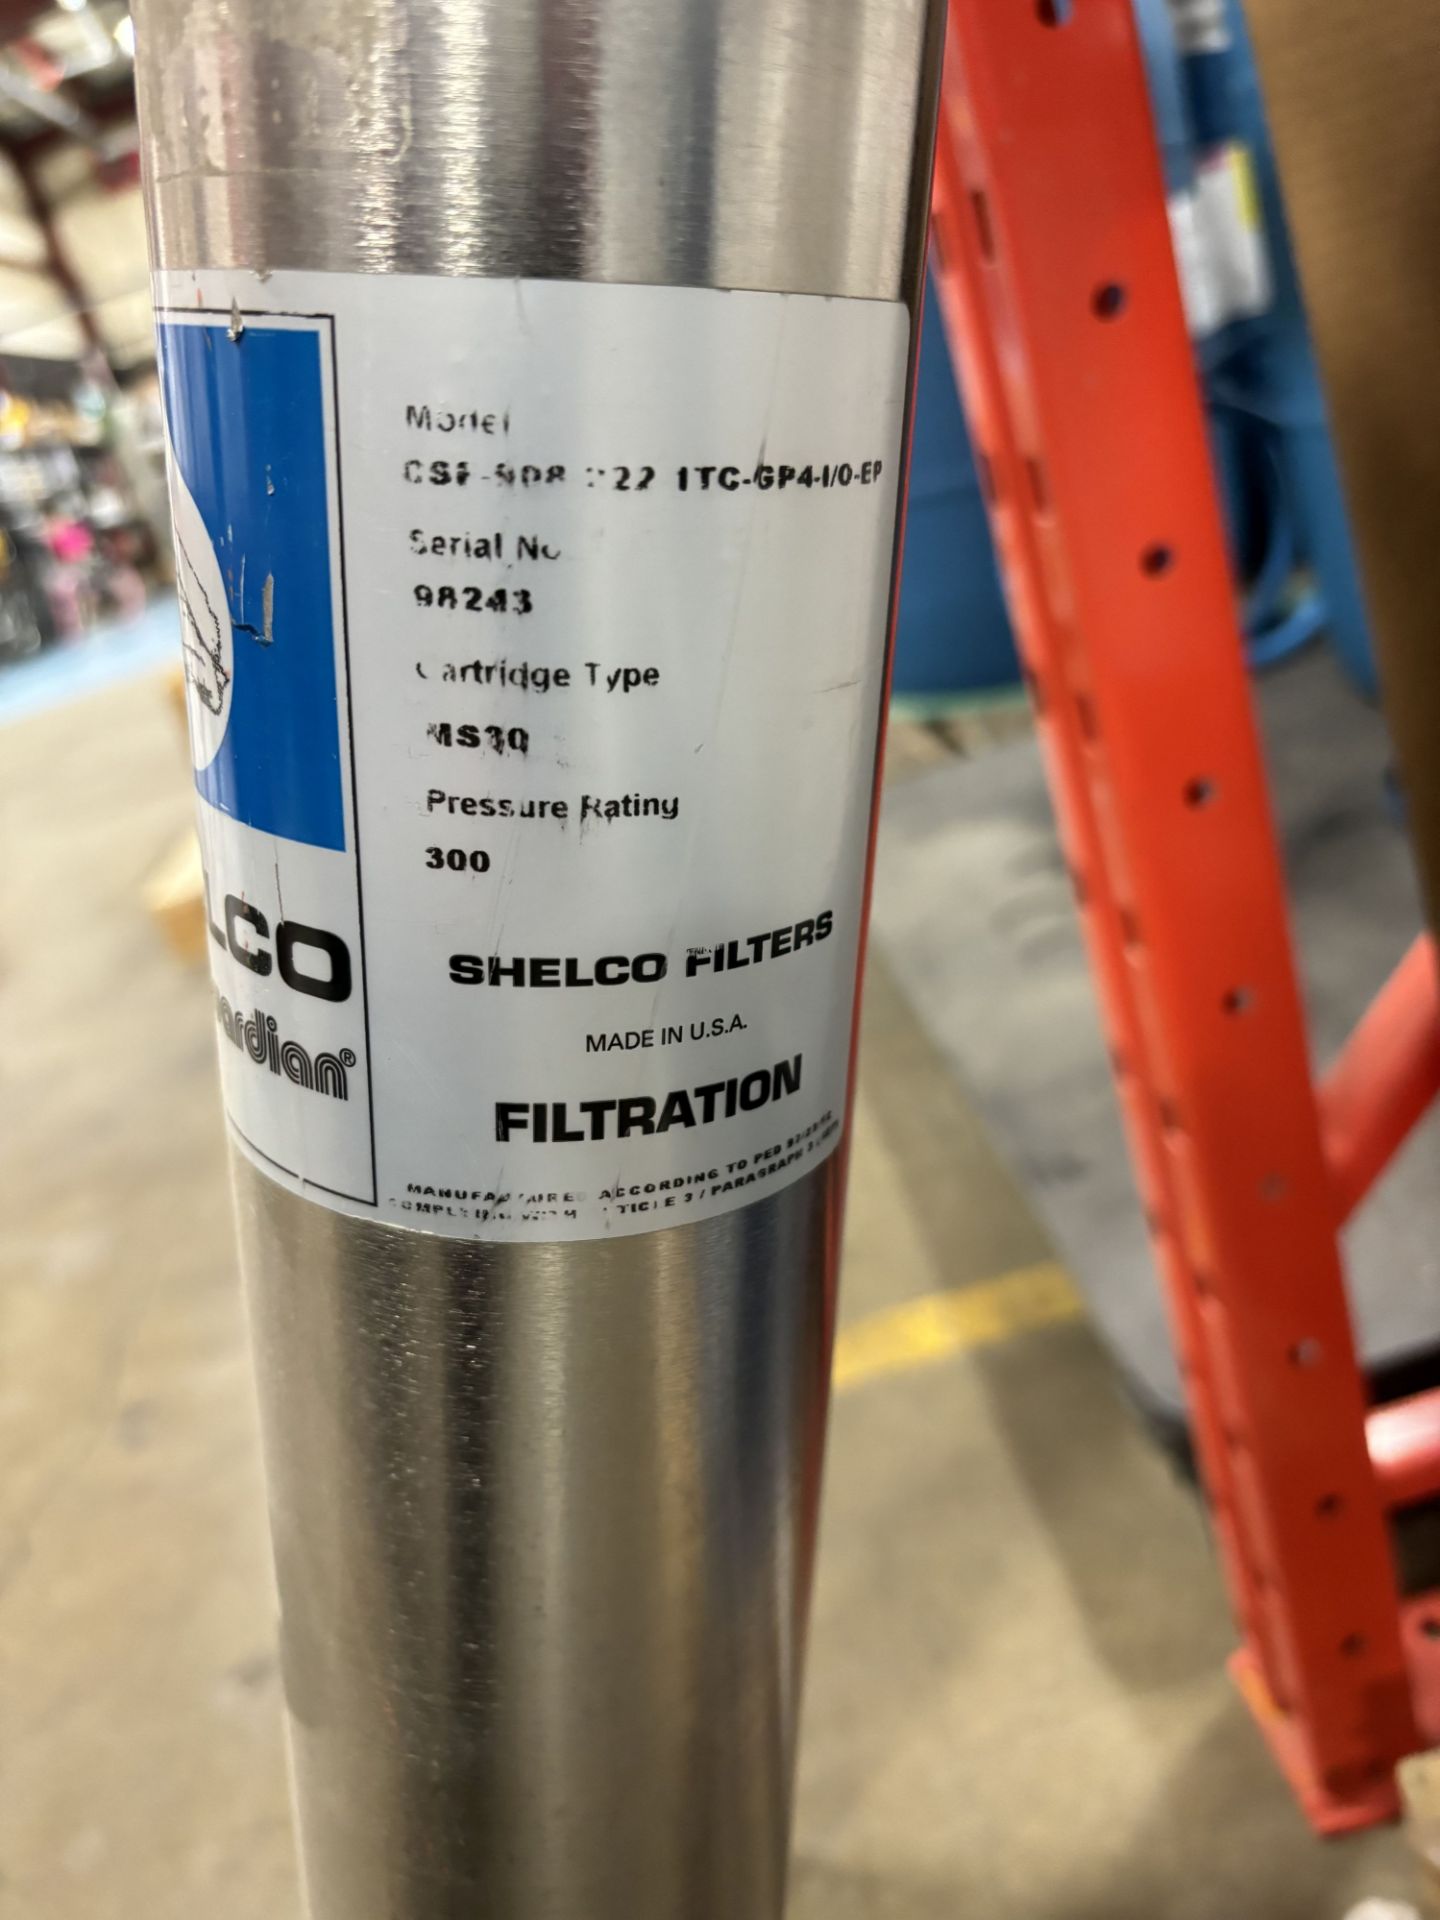 Stainless Steel Shelco Filter - Image 4 of 4